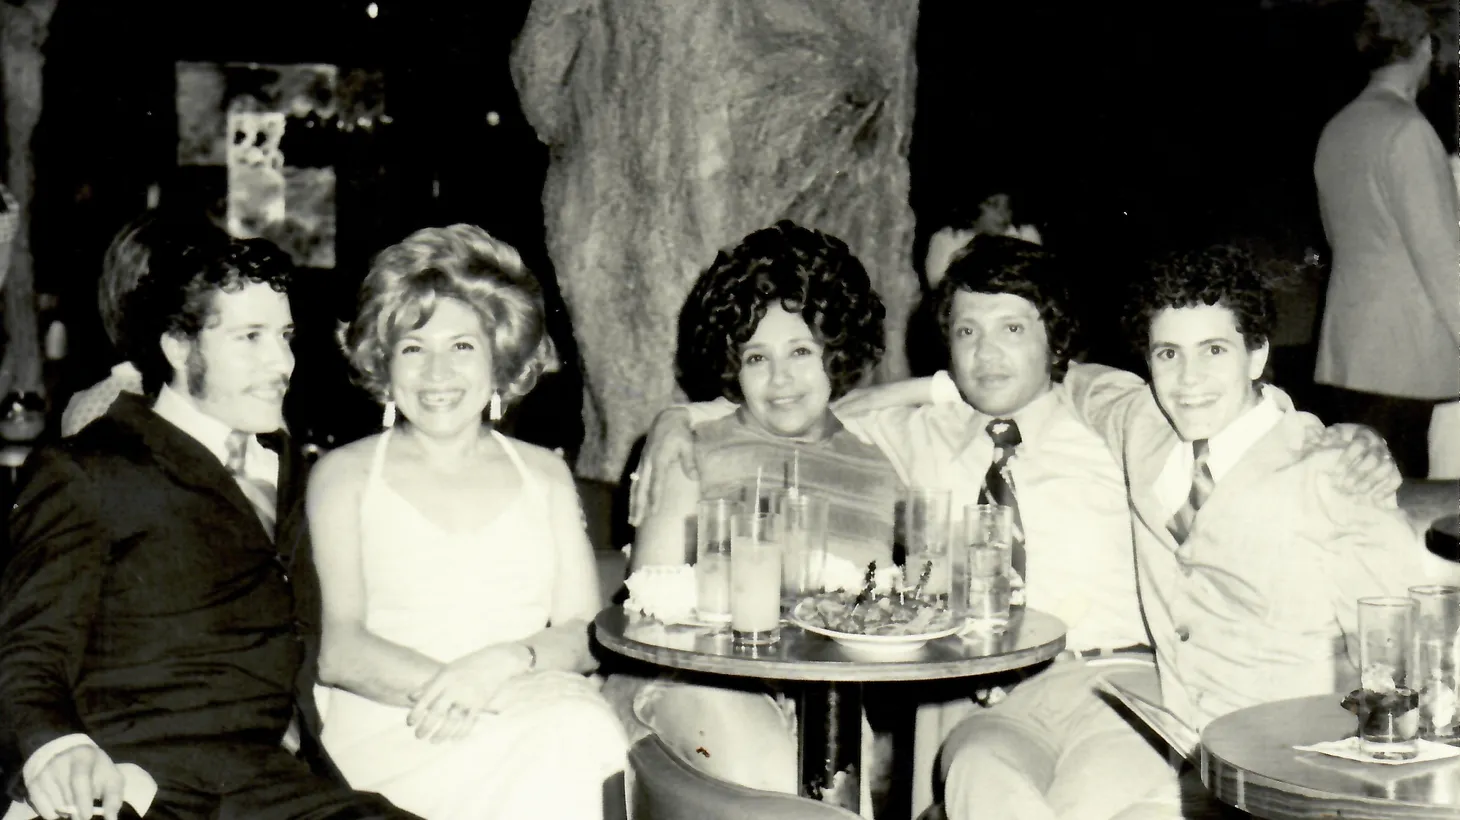 Nayarit workers spend a night out on the town at Casa Escobar in Santa Monica, circa 1968.